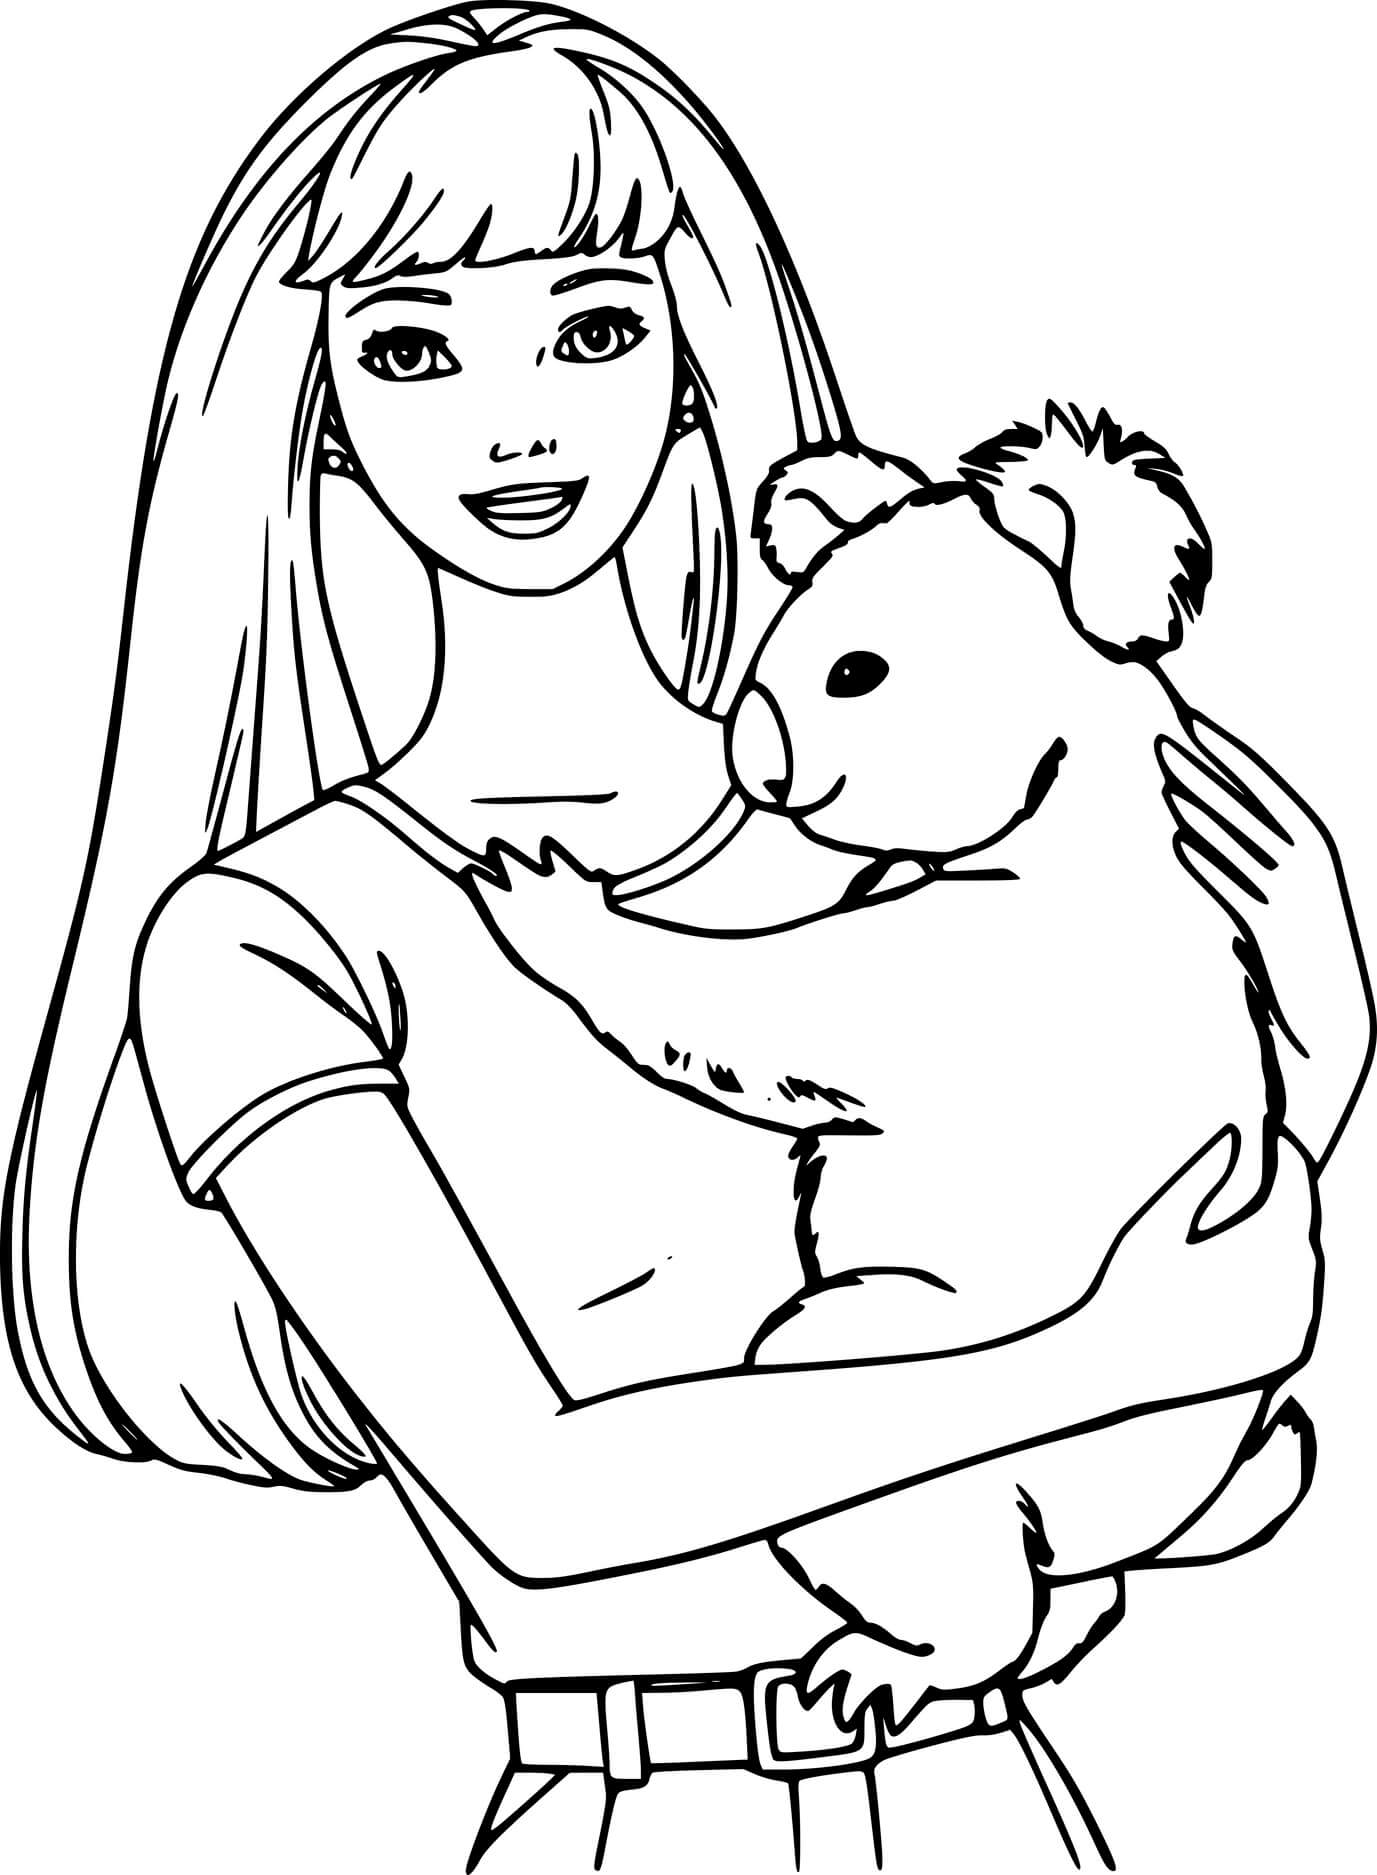 A Girl Holds A Koala Coloring Pages   Coloring Cool